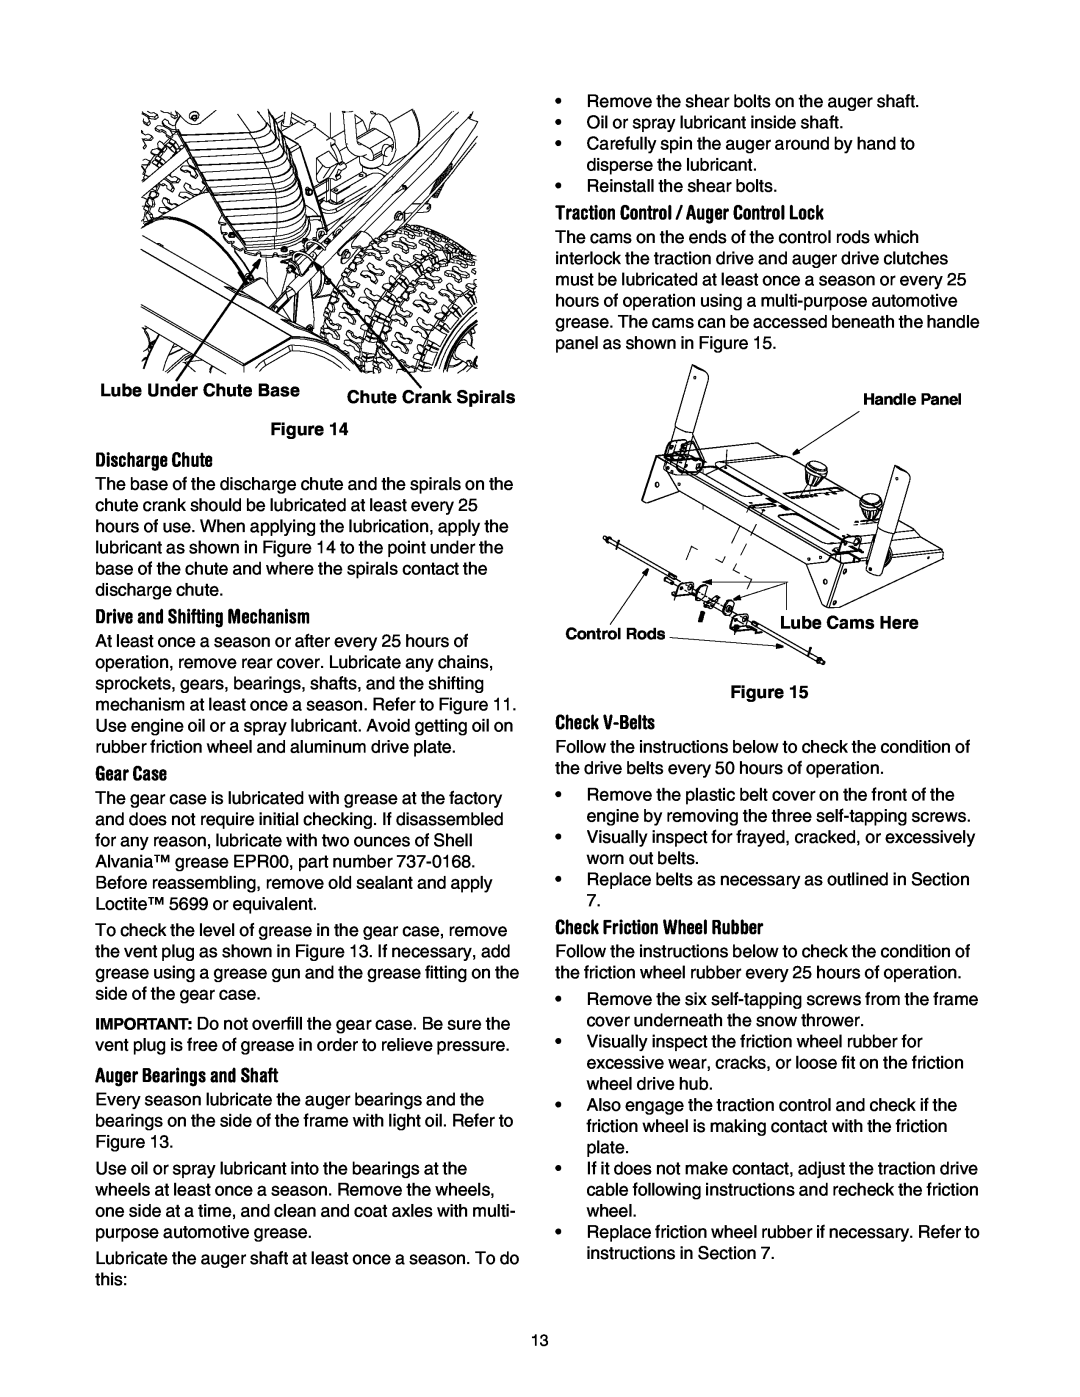 Cub Cadet 1345 SWE Drive and Shifting Mechanism, Gear Case, Auger Bearings and Shaft, Check V-Belts, Lube Under Chute Base 